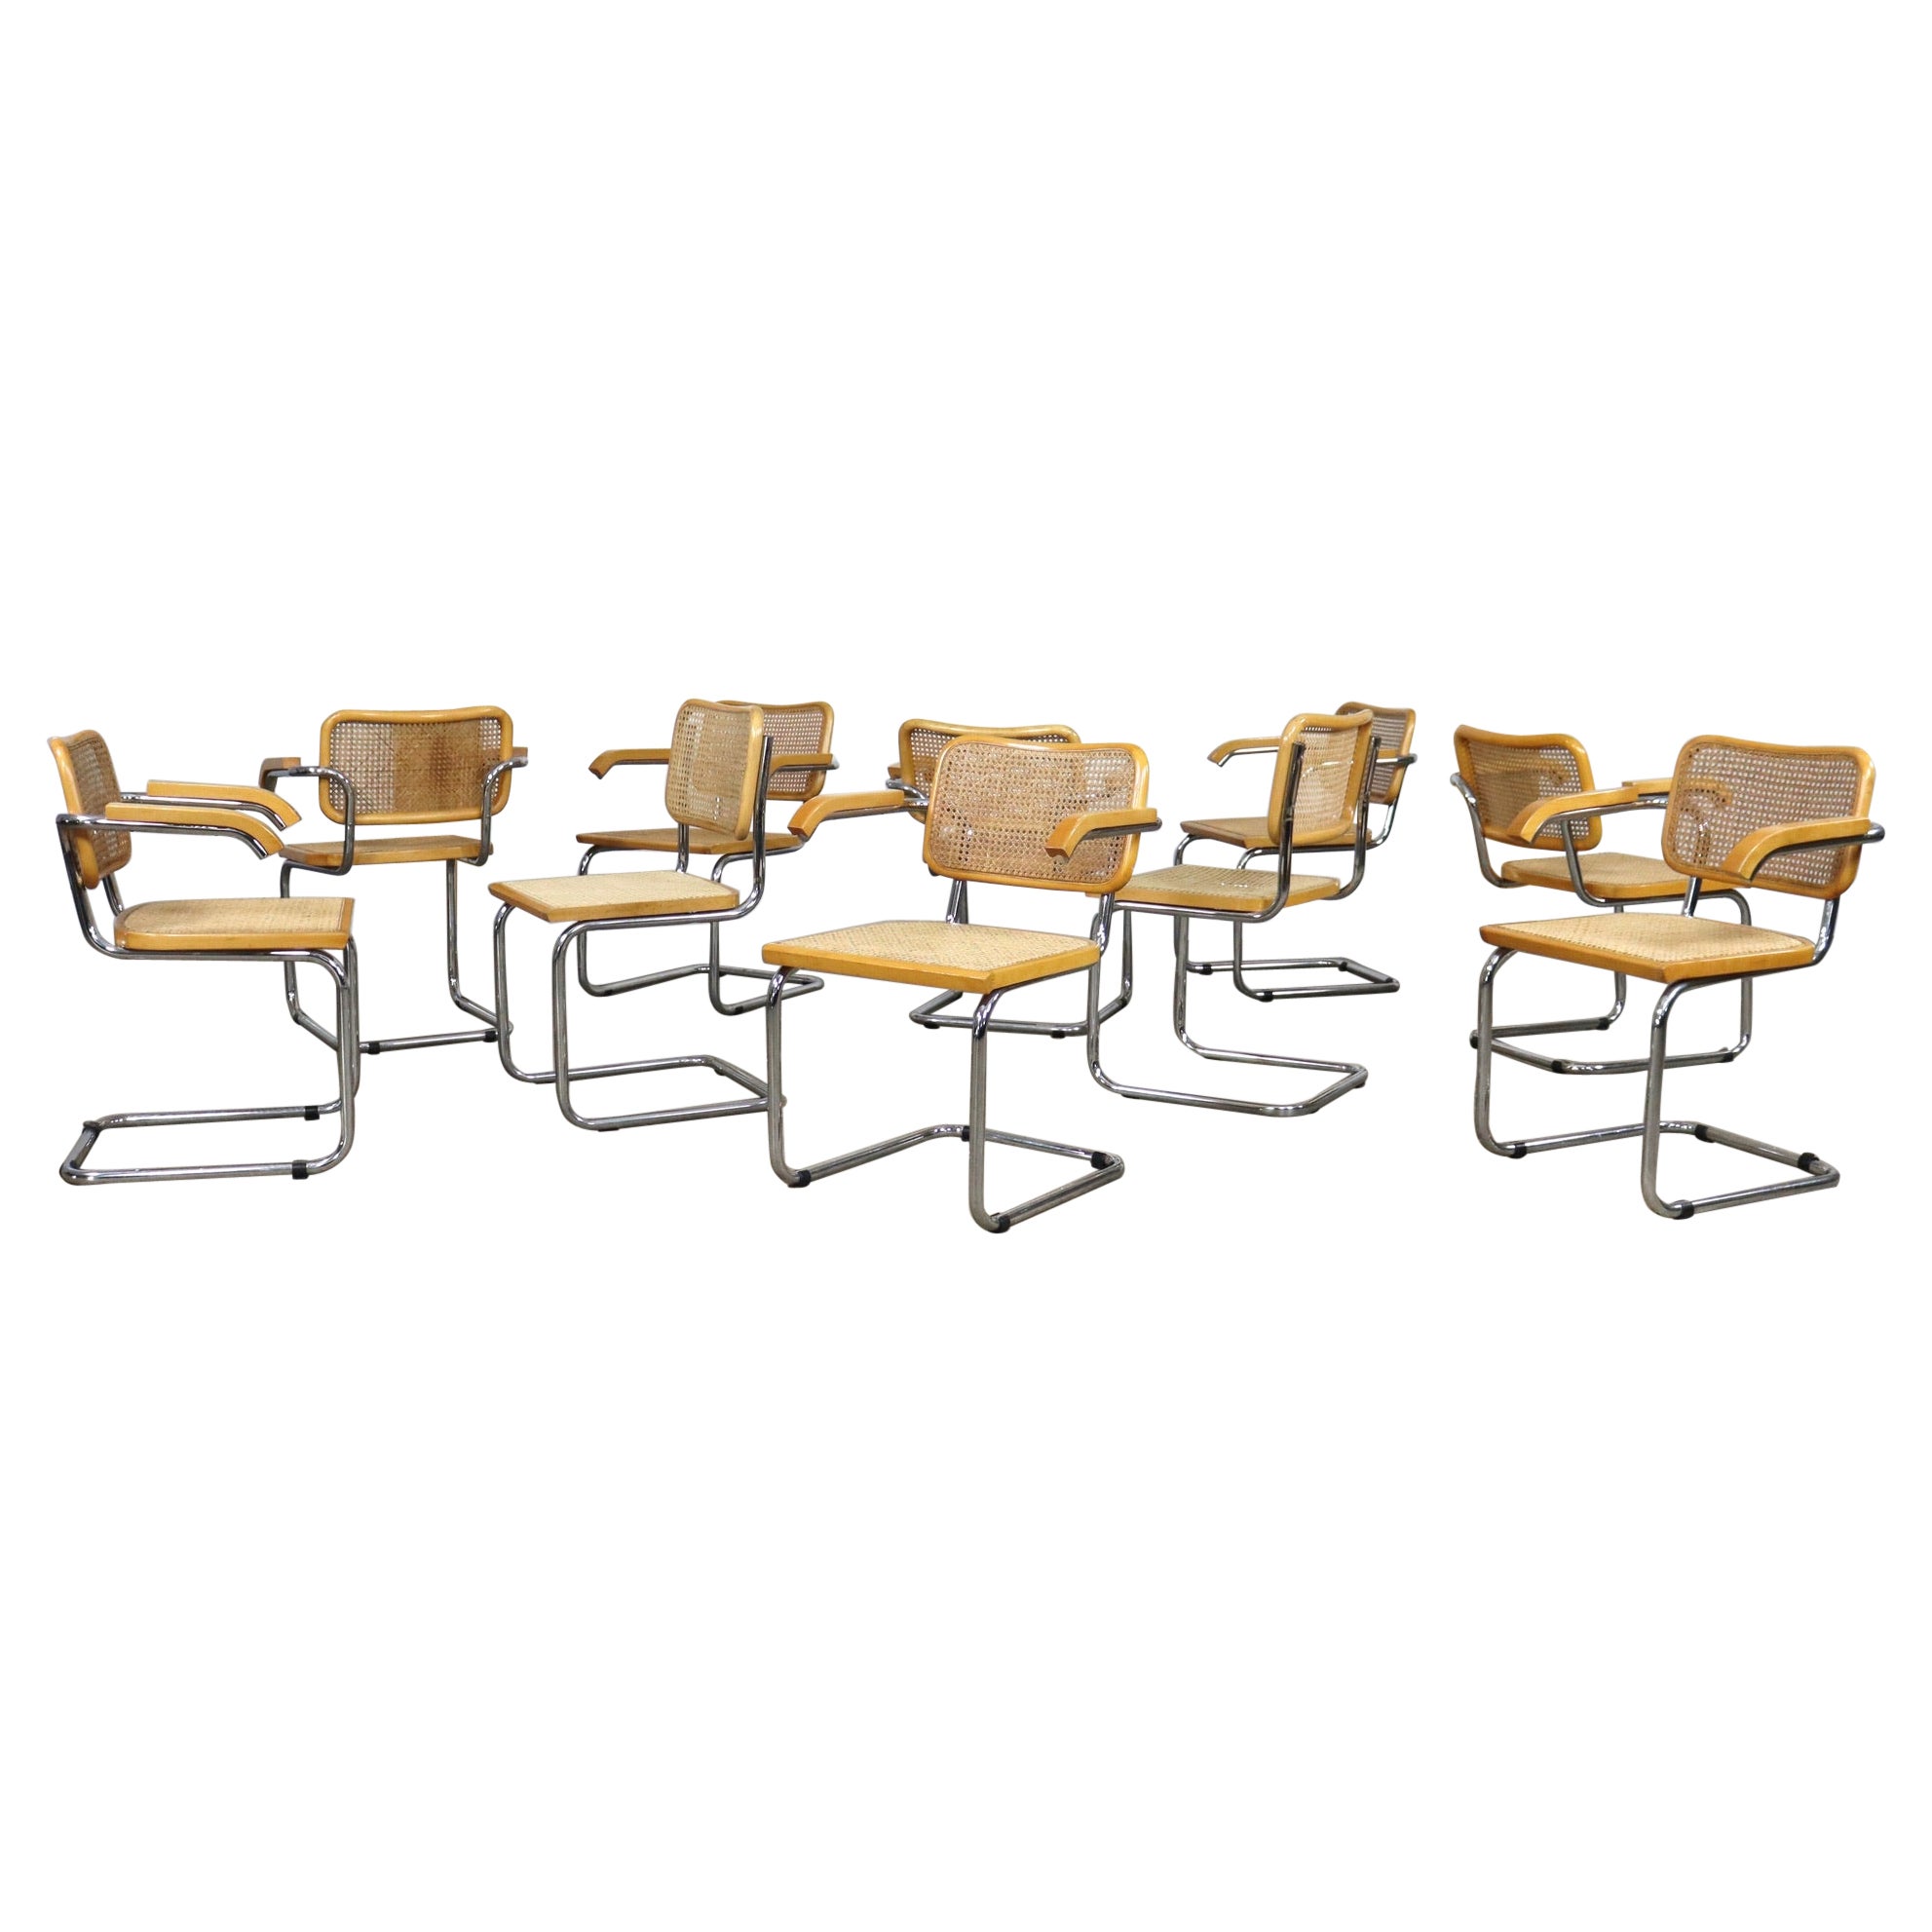 Set of 10 Marcel Breuer B32 Chrome and Webbing Cesca Dining Chairs, Italy 1960s